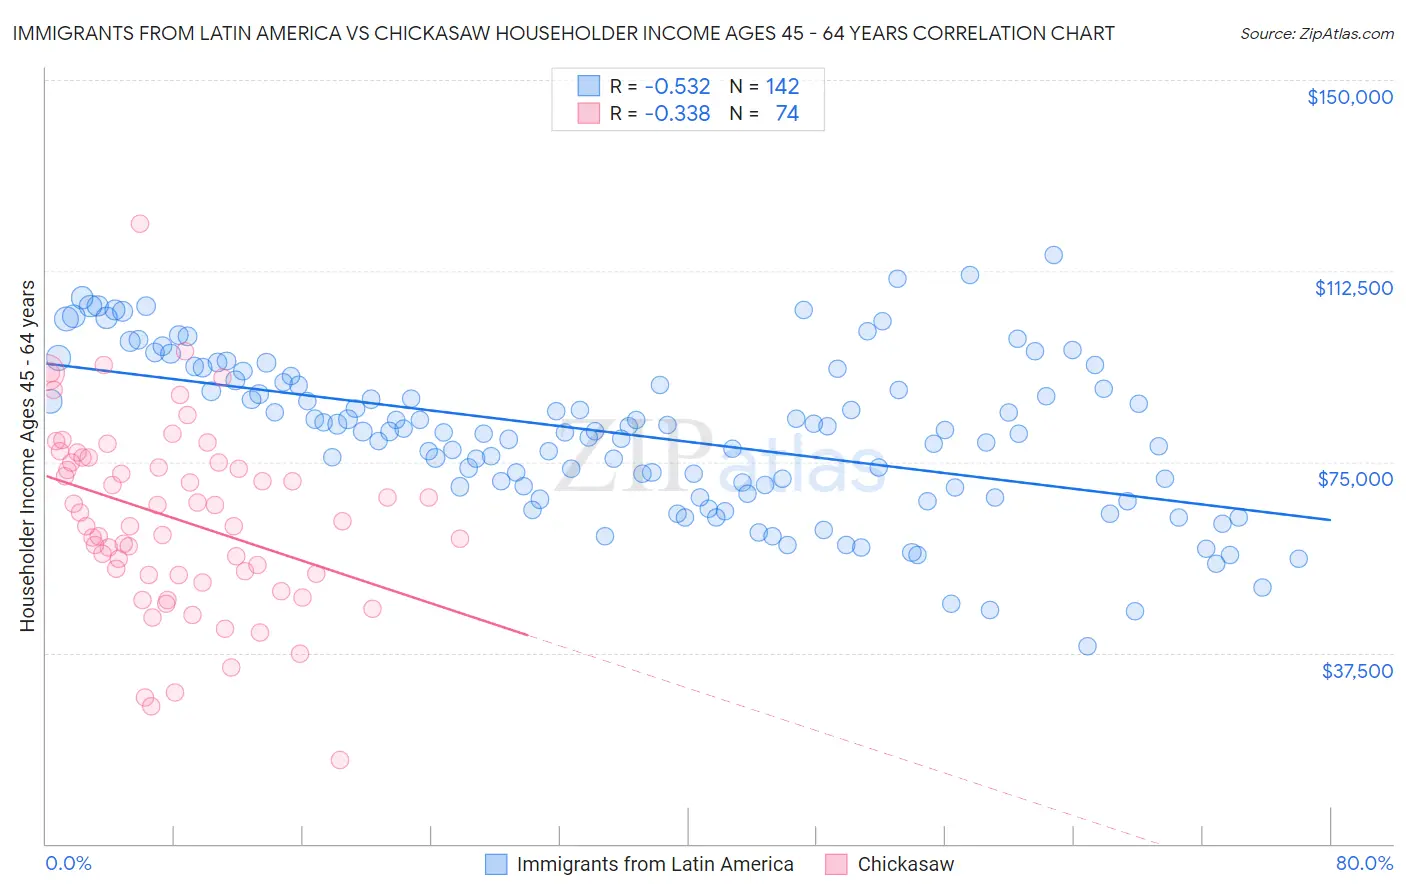 Immigrants from Latin America vs Chickasaw Householder Income Ages 45 - 64 years